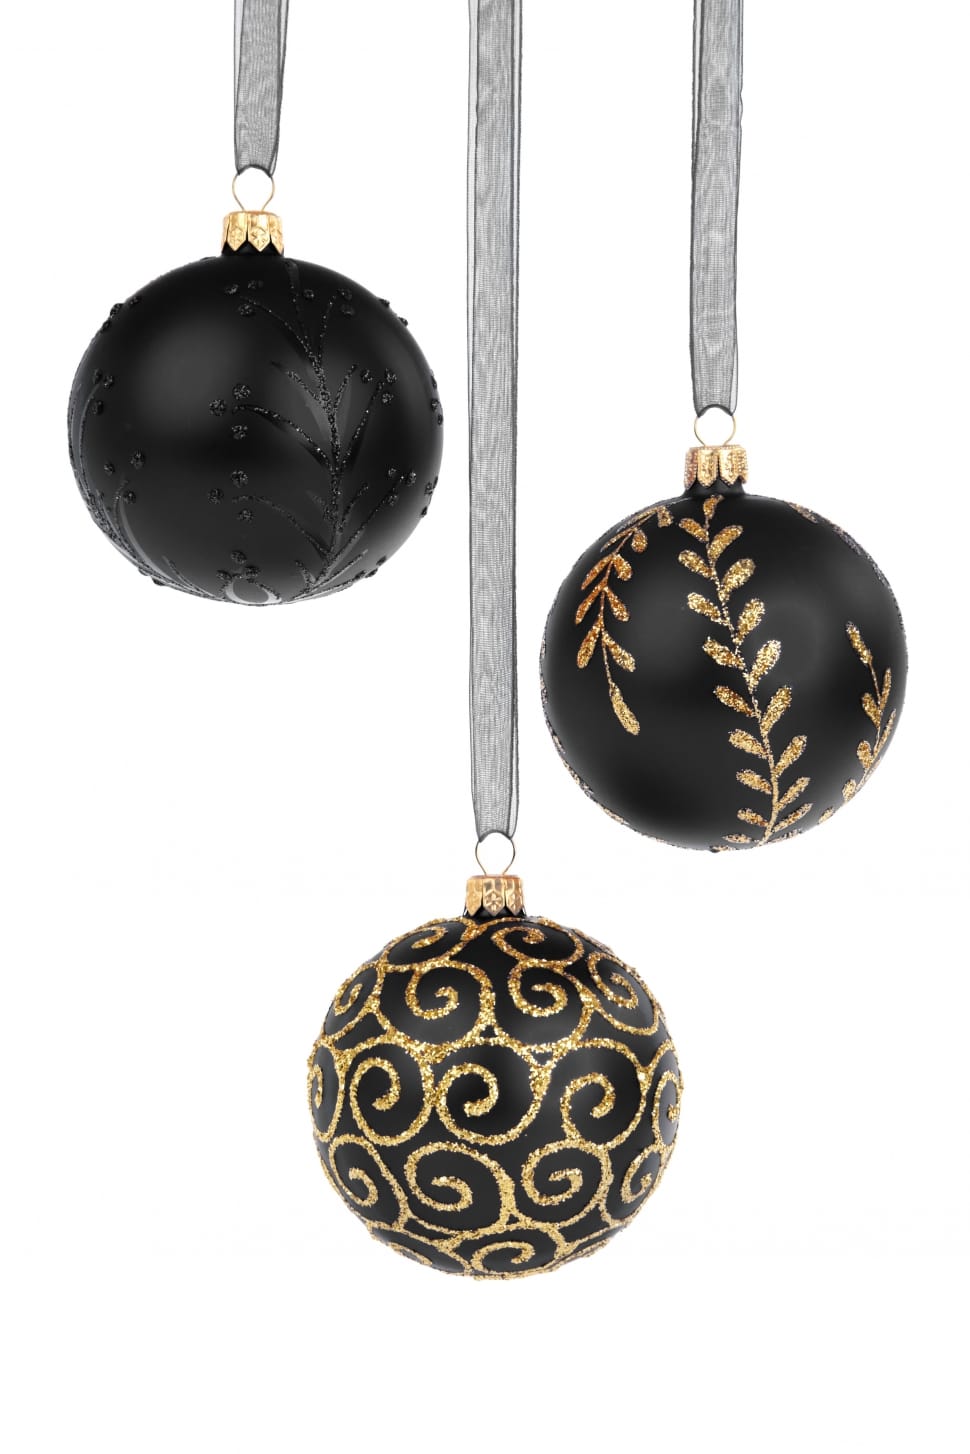 3 black and gold baubles preview